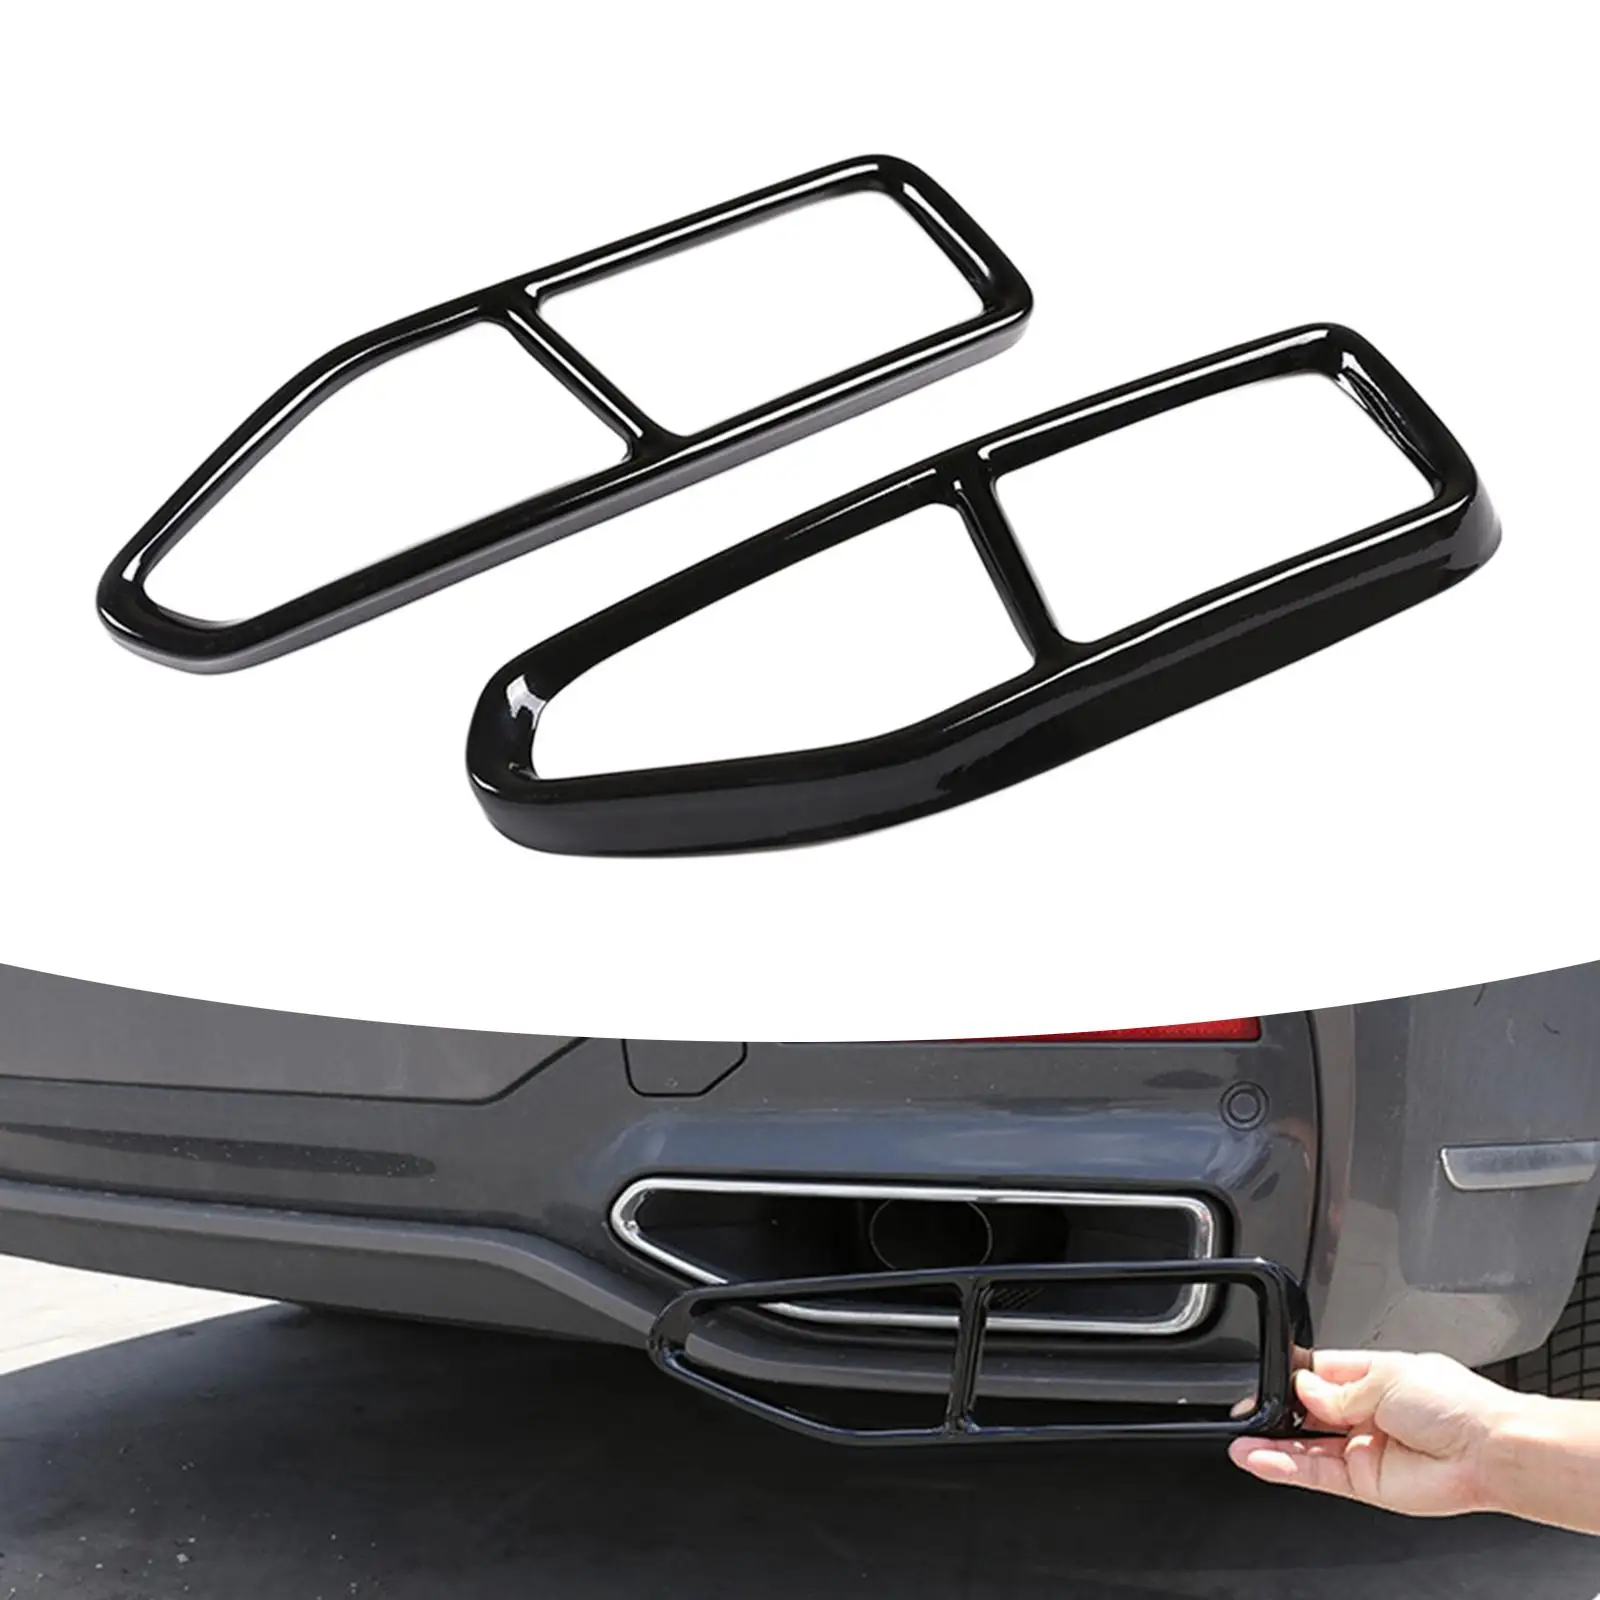 2x Exhaust Pipe Output Cover Rustproof Decoration Cover for BMW 7 G11